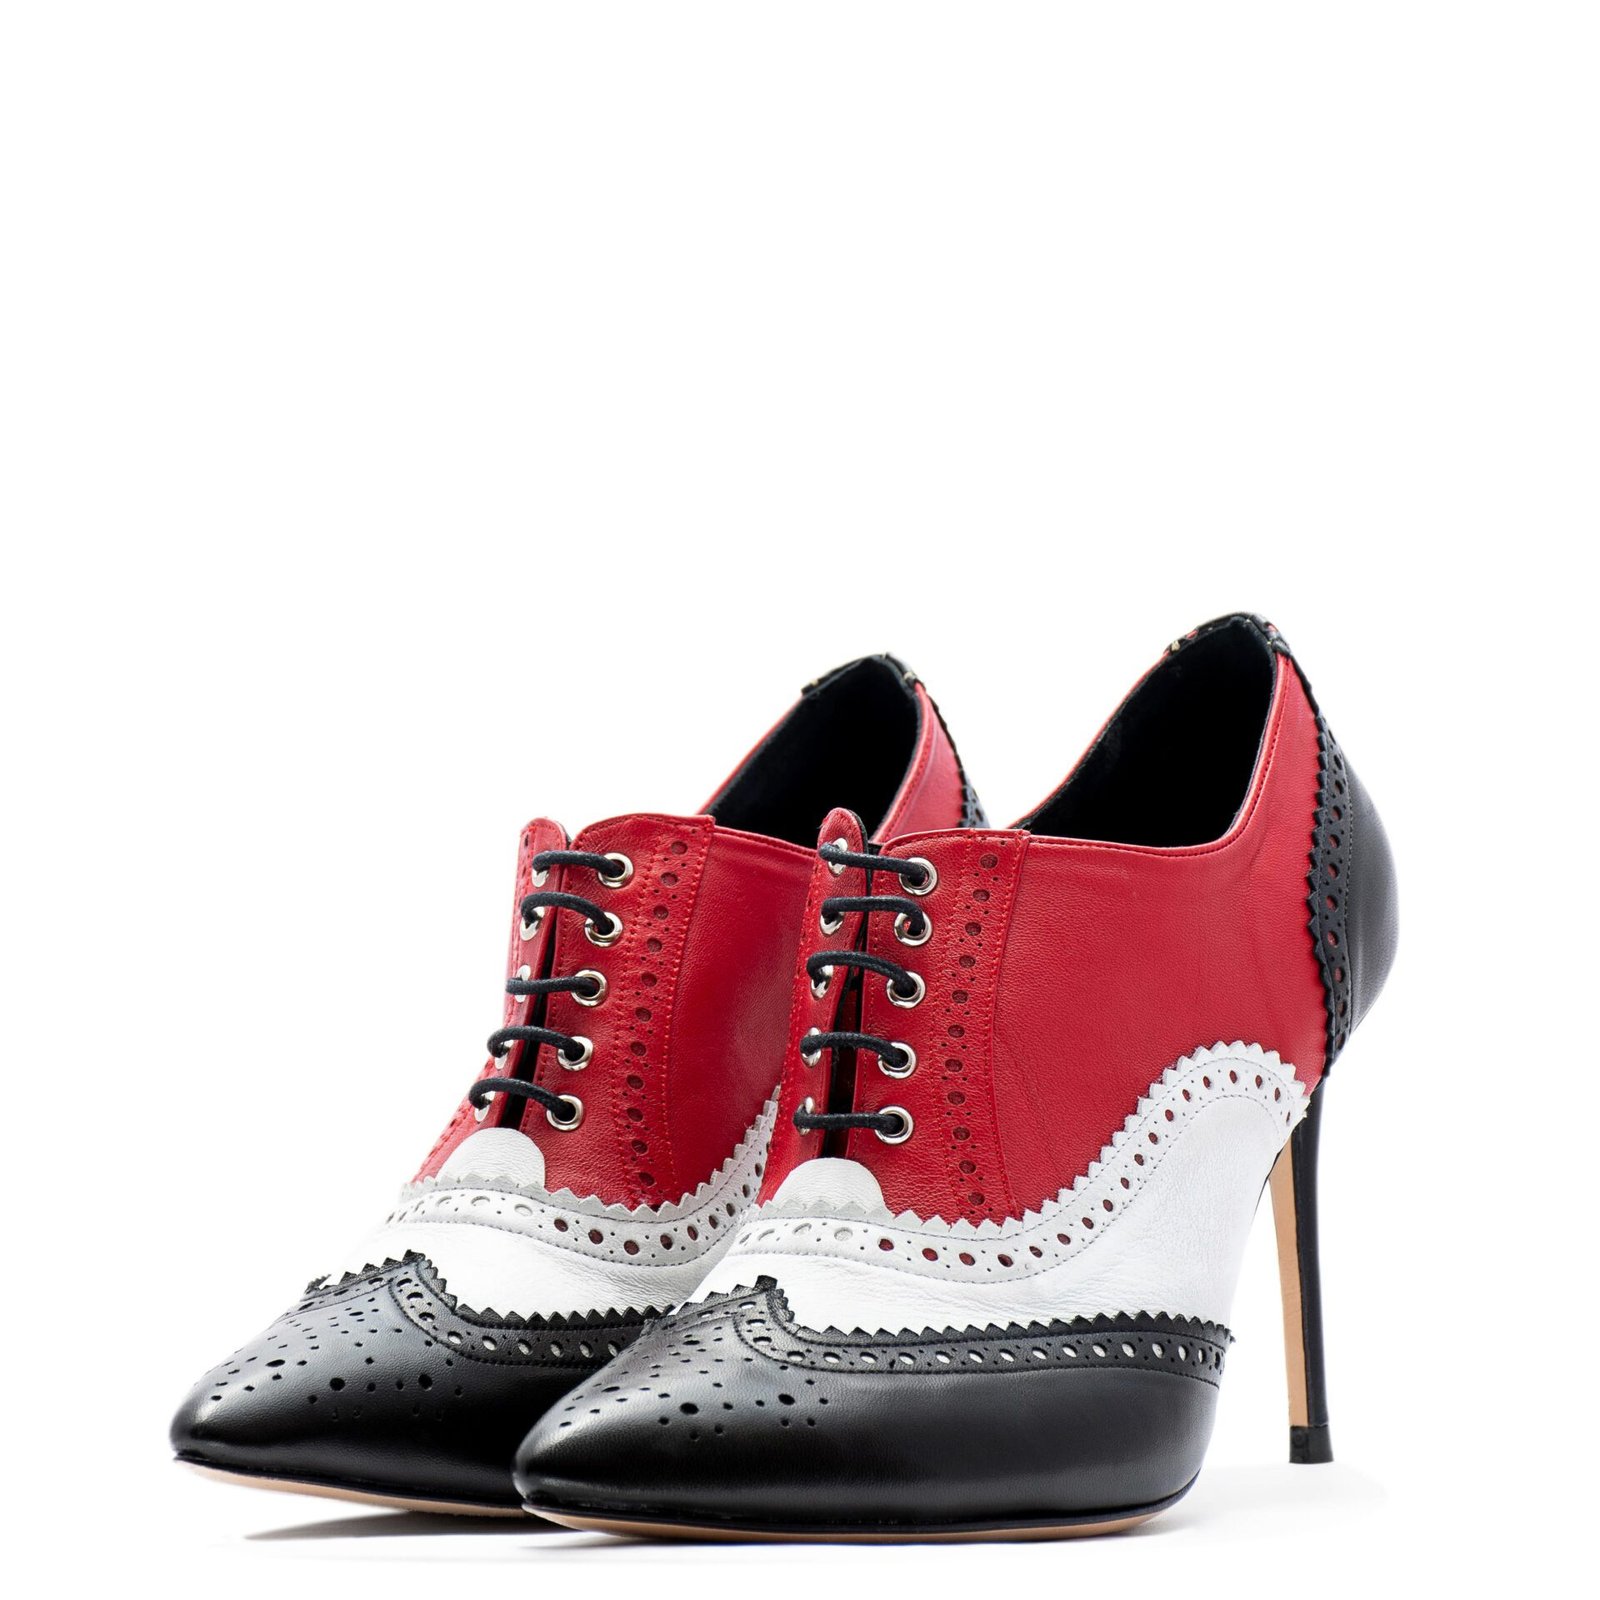 pointed-toe oxford heels for men & women